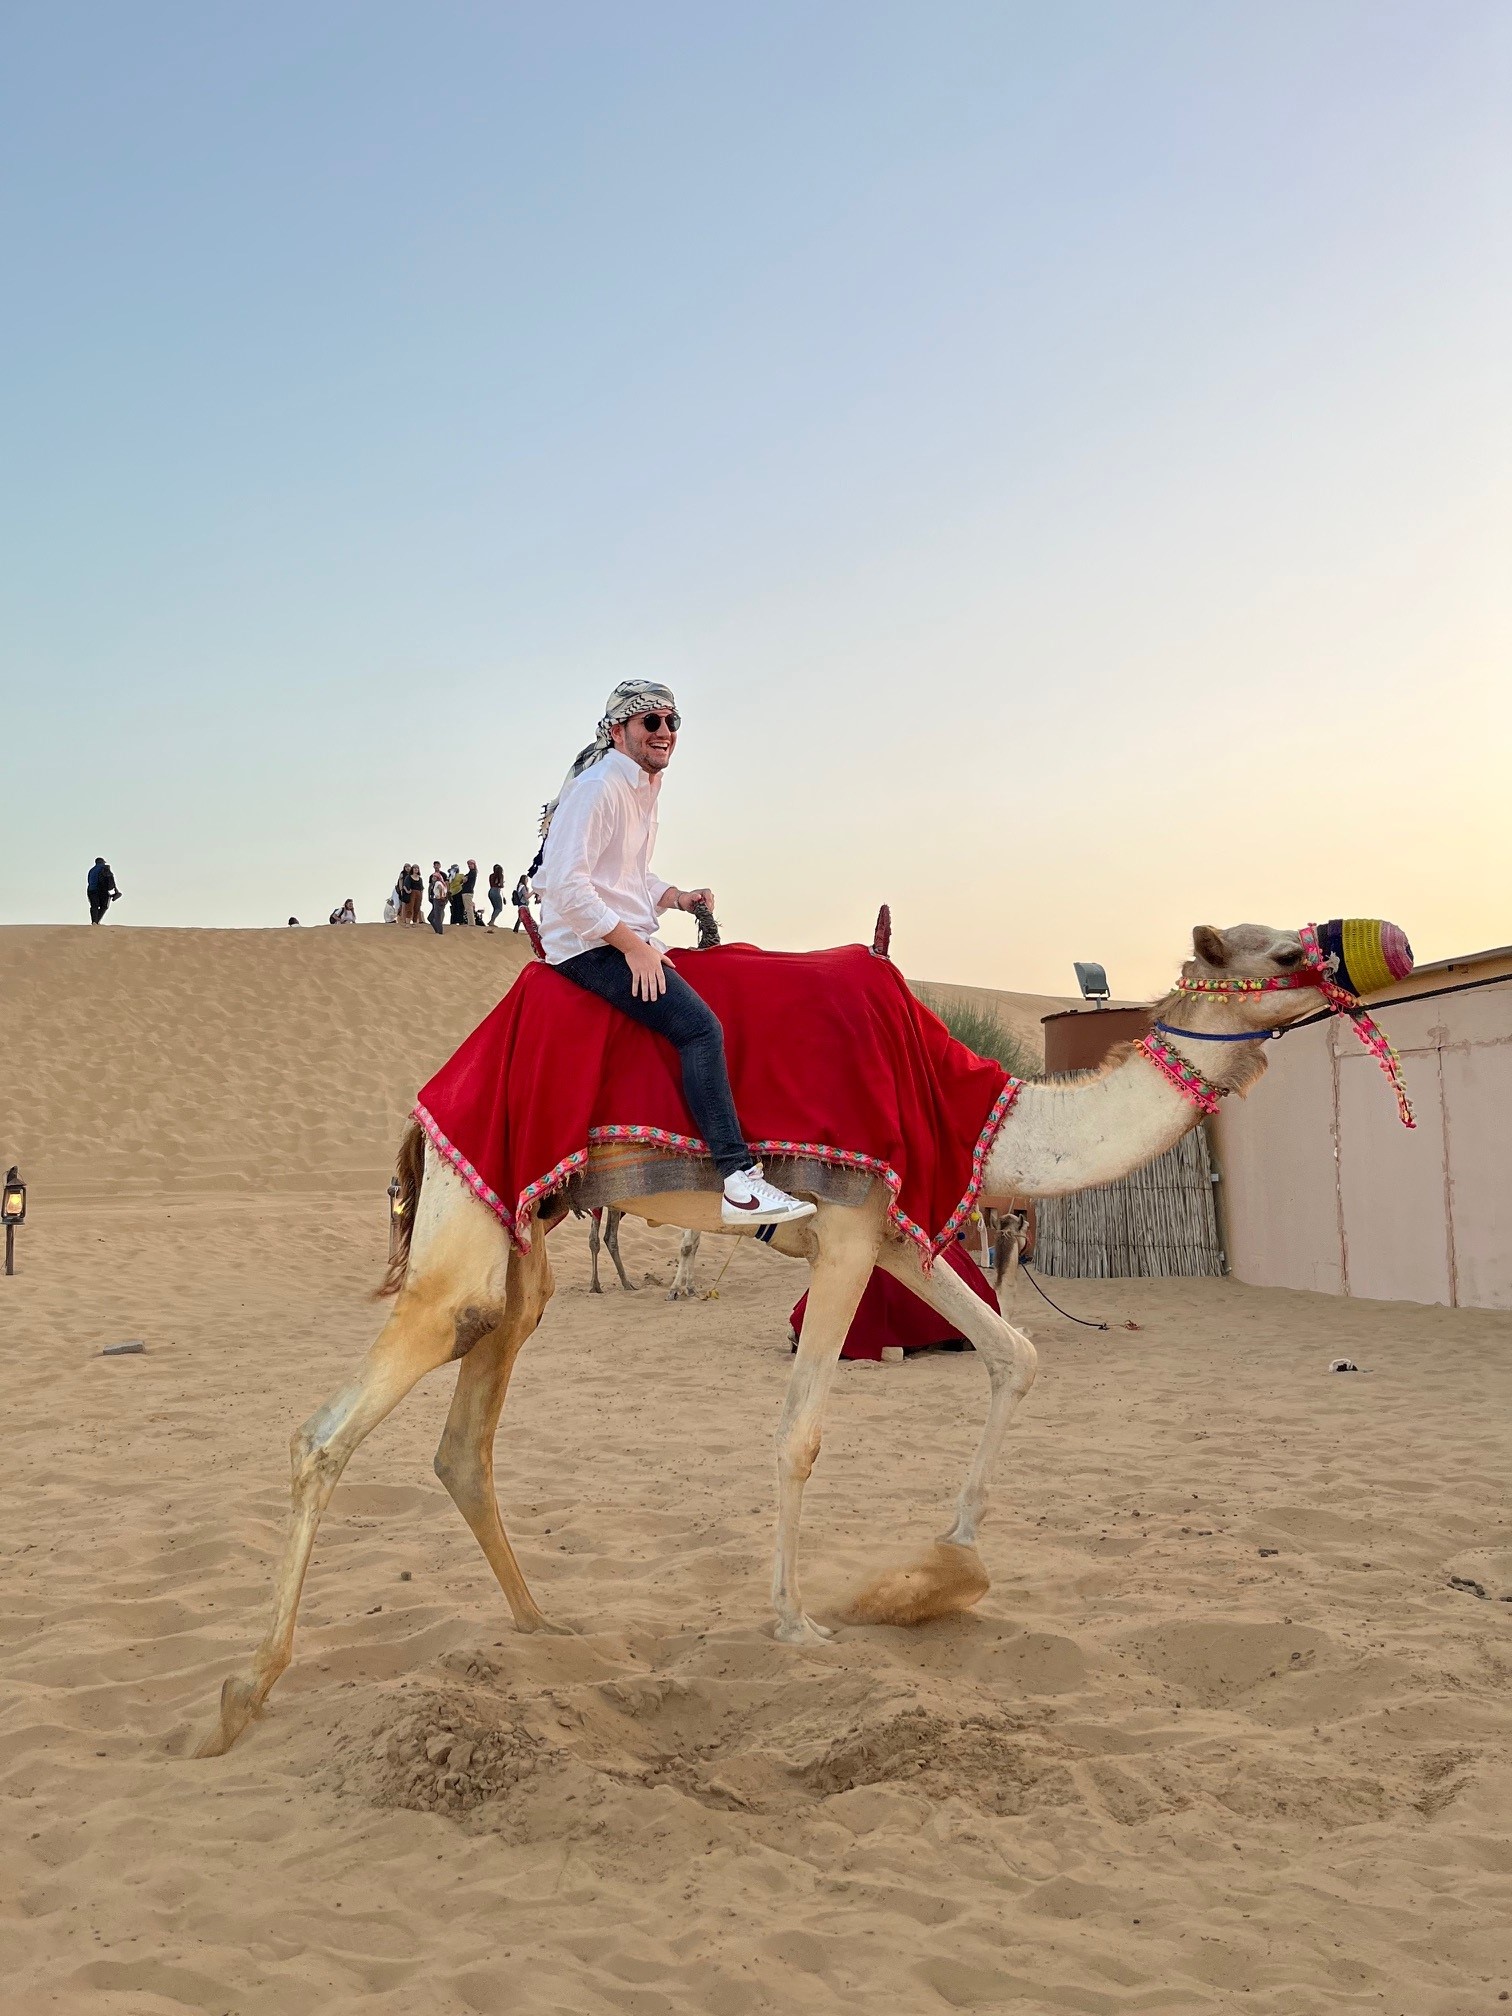 A man rides a camel in the desert